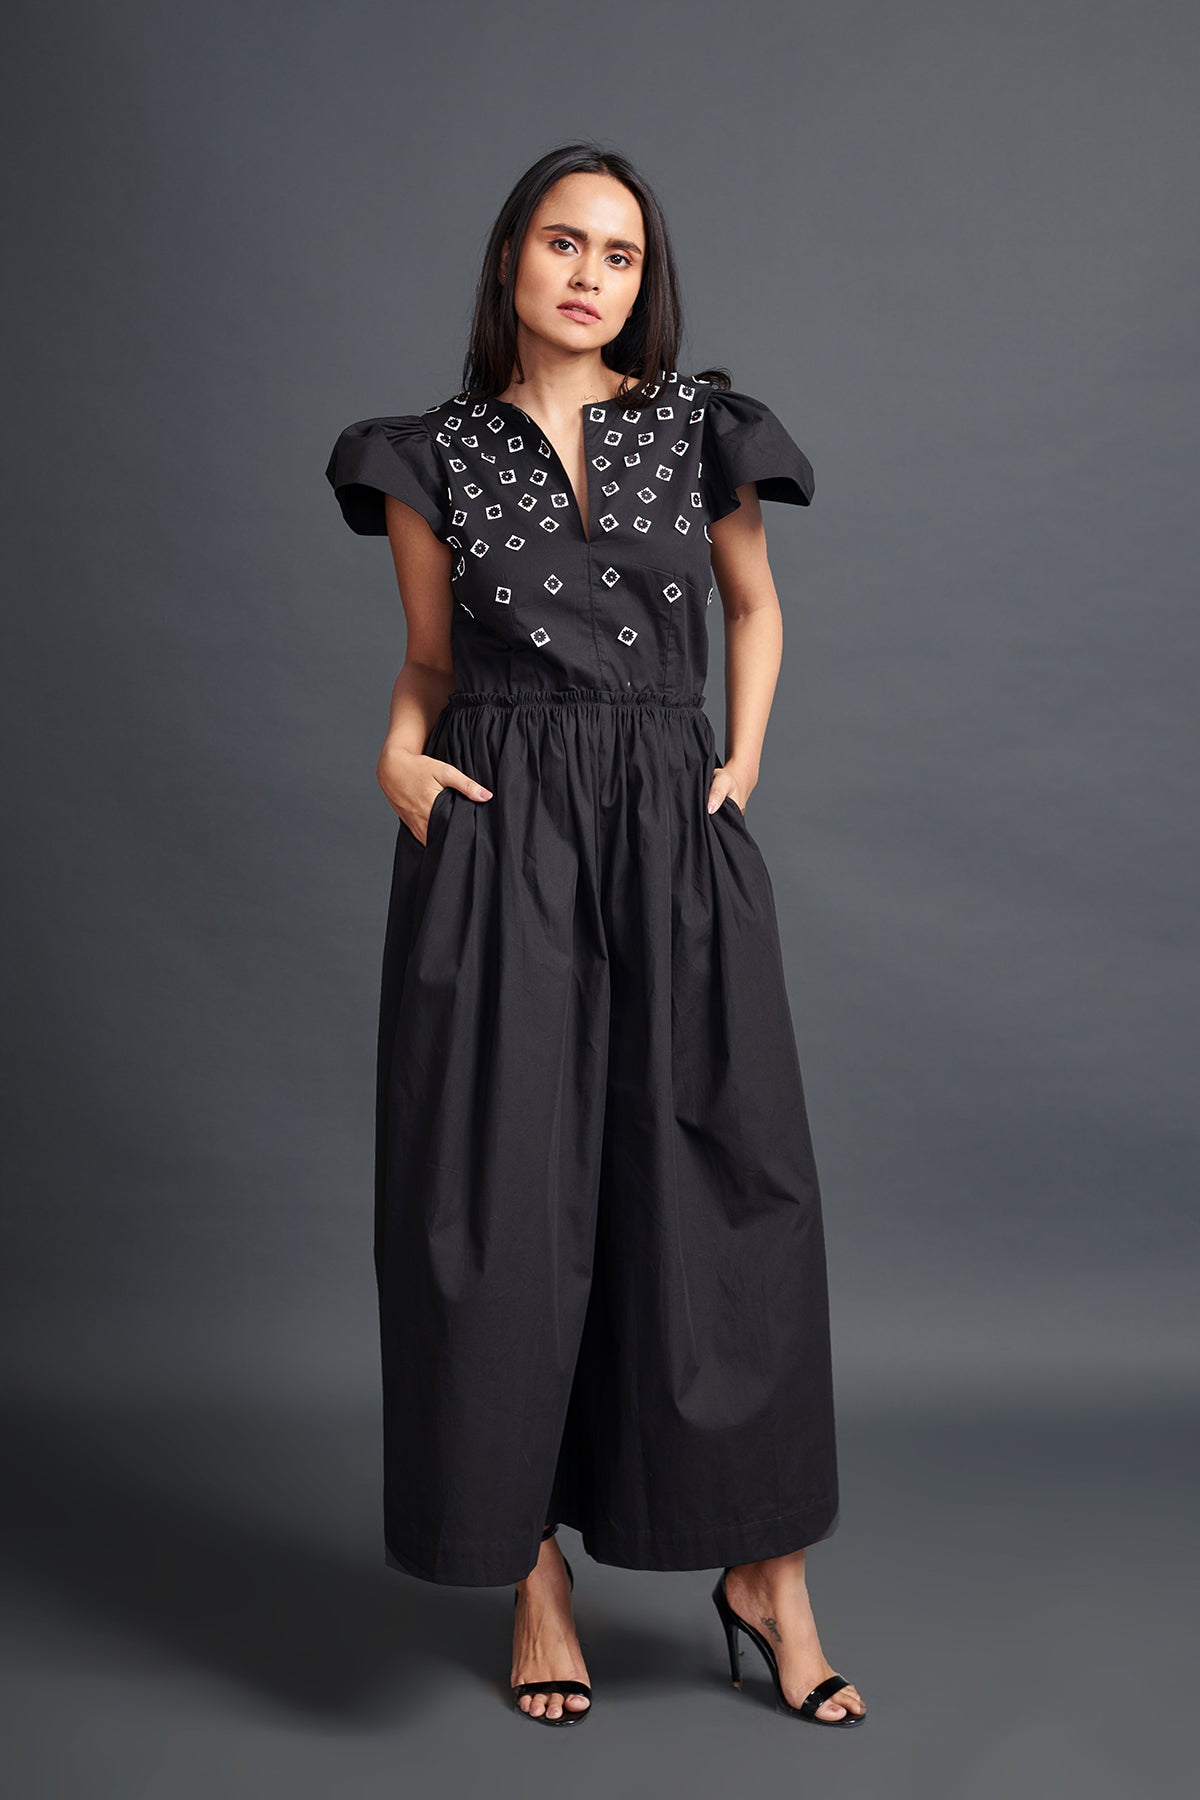 Image of BLACK BACKLESS JUMPSUIT IN COTTON BASE WITH CUTWORK EMBROIDERY. From savoirfashions.com